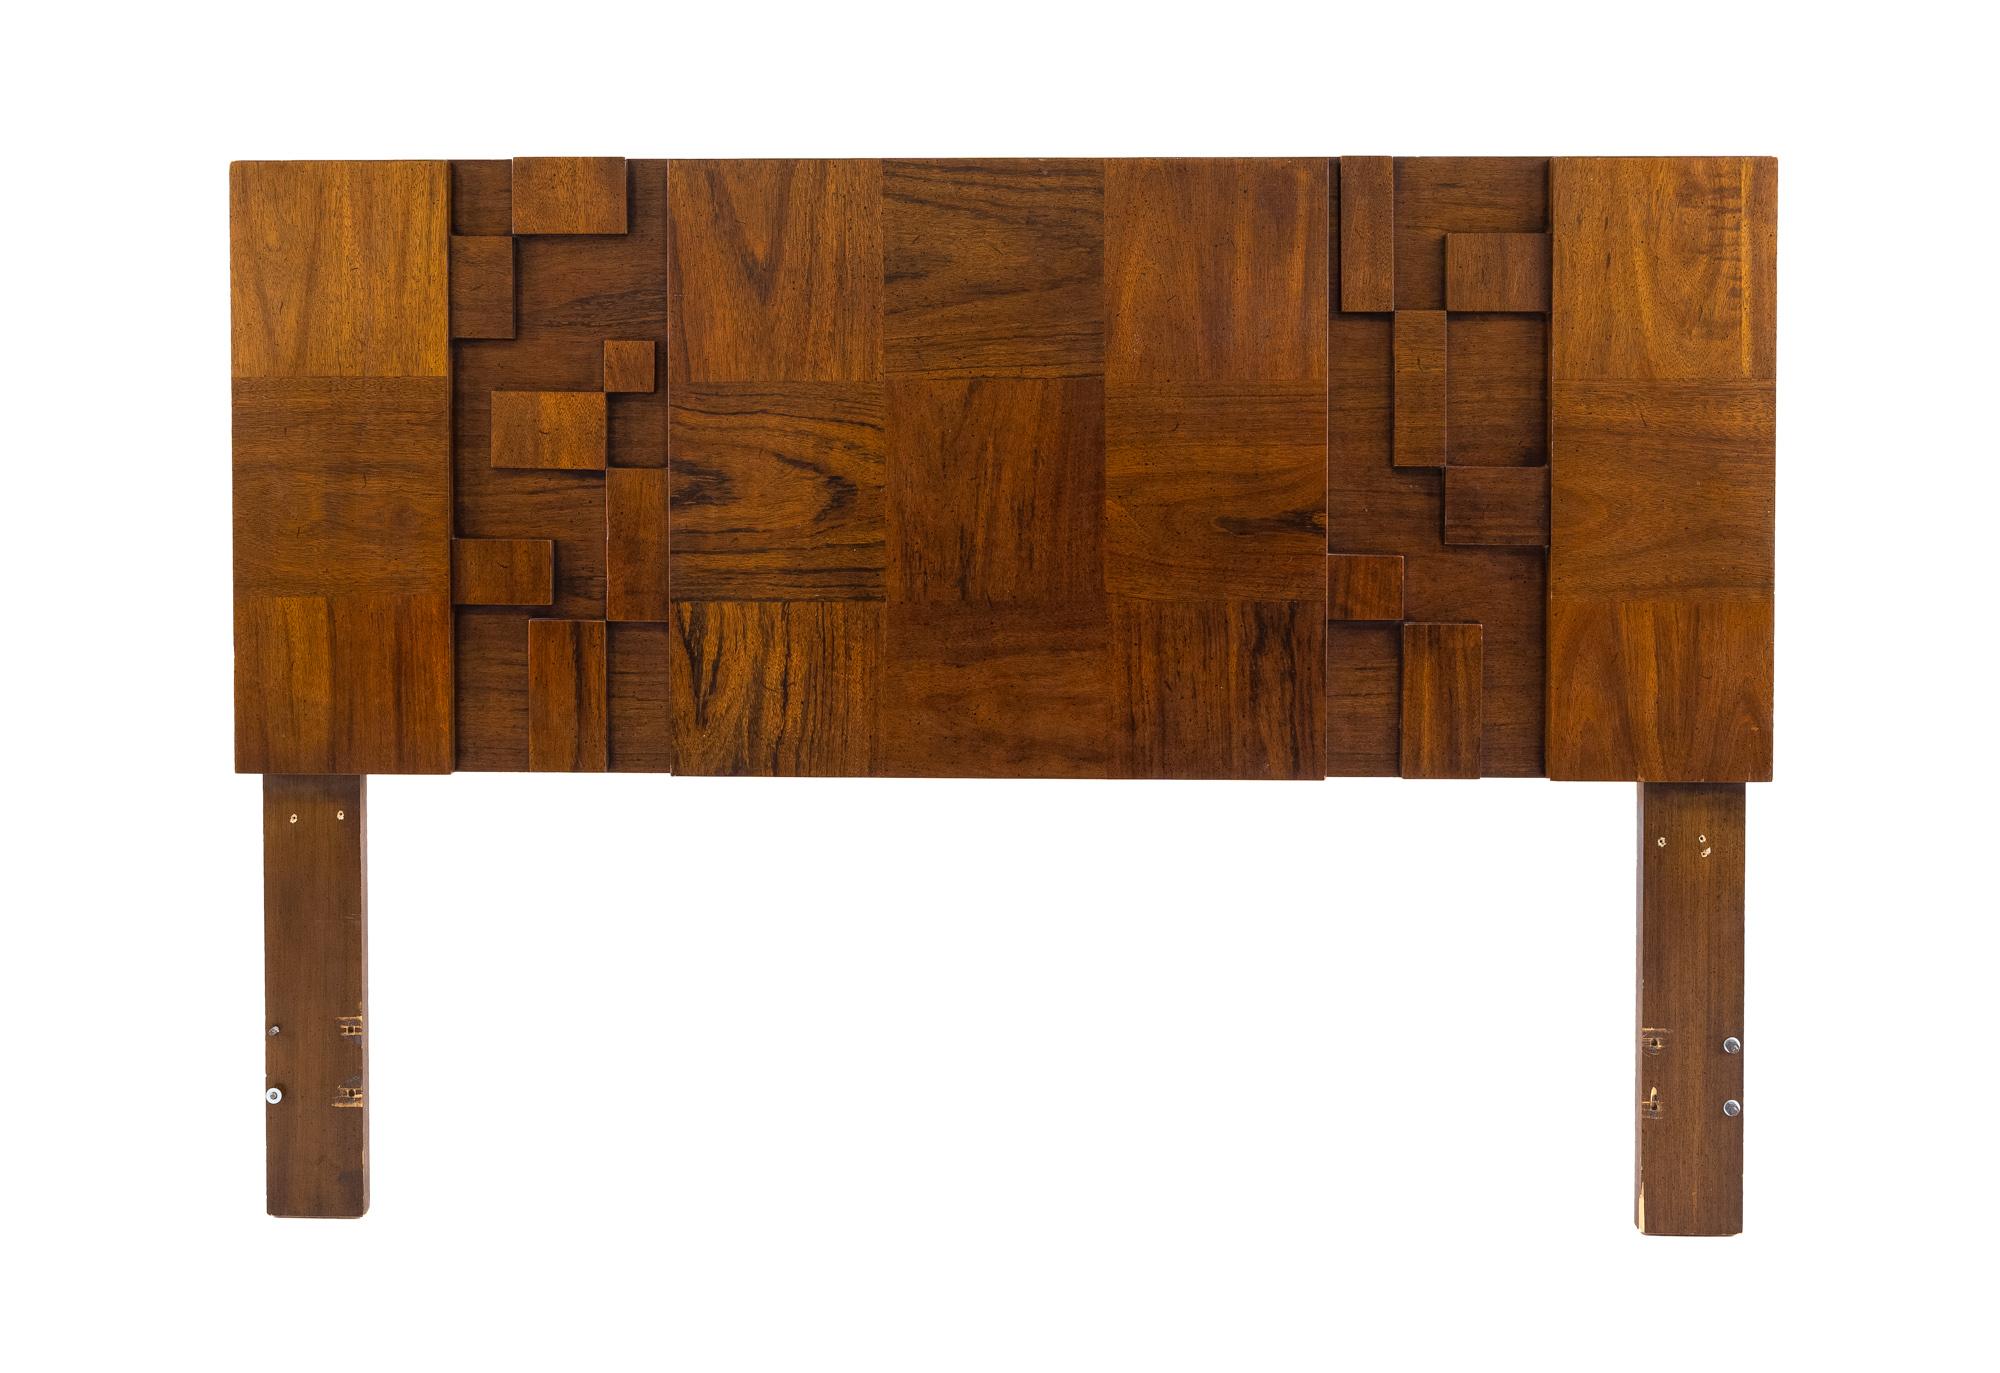 Lane Staccato mid century brutalist walnut queen size headboard

This headboard measures: 60 wide x 2 deep x 42 inches high

All pieces of furniture can be had in what we call restored vintage condition. That means the piece is restored upon